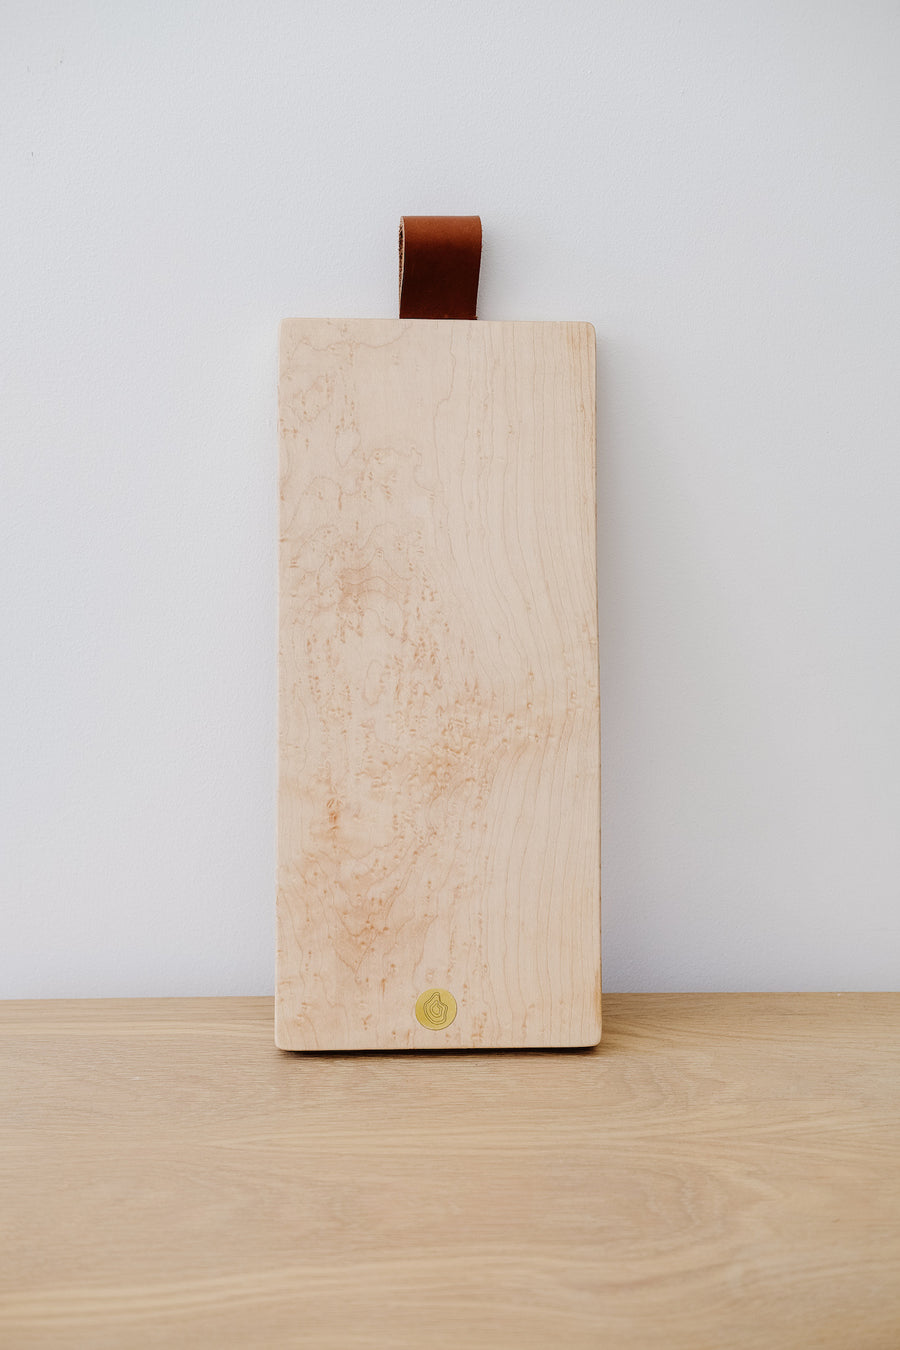 Font view of Studio Inko's Bird's Eye Maple Cutting and Serving Board against a white wall. - Saffron and Poe